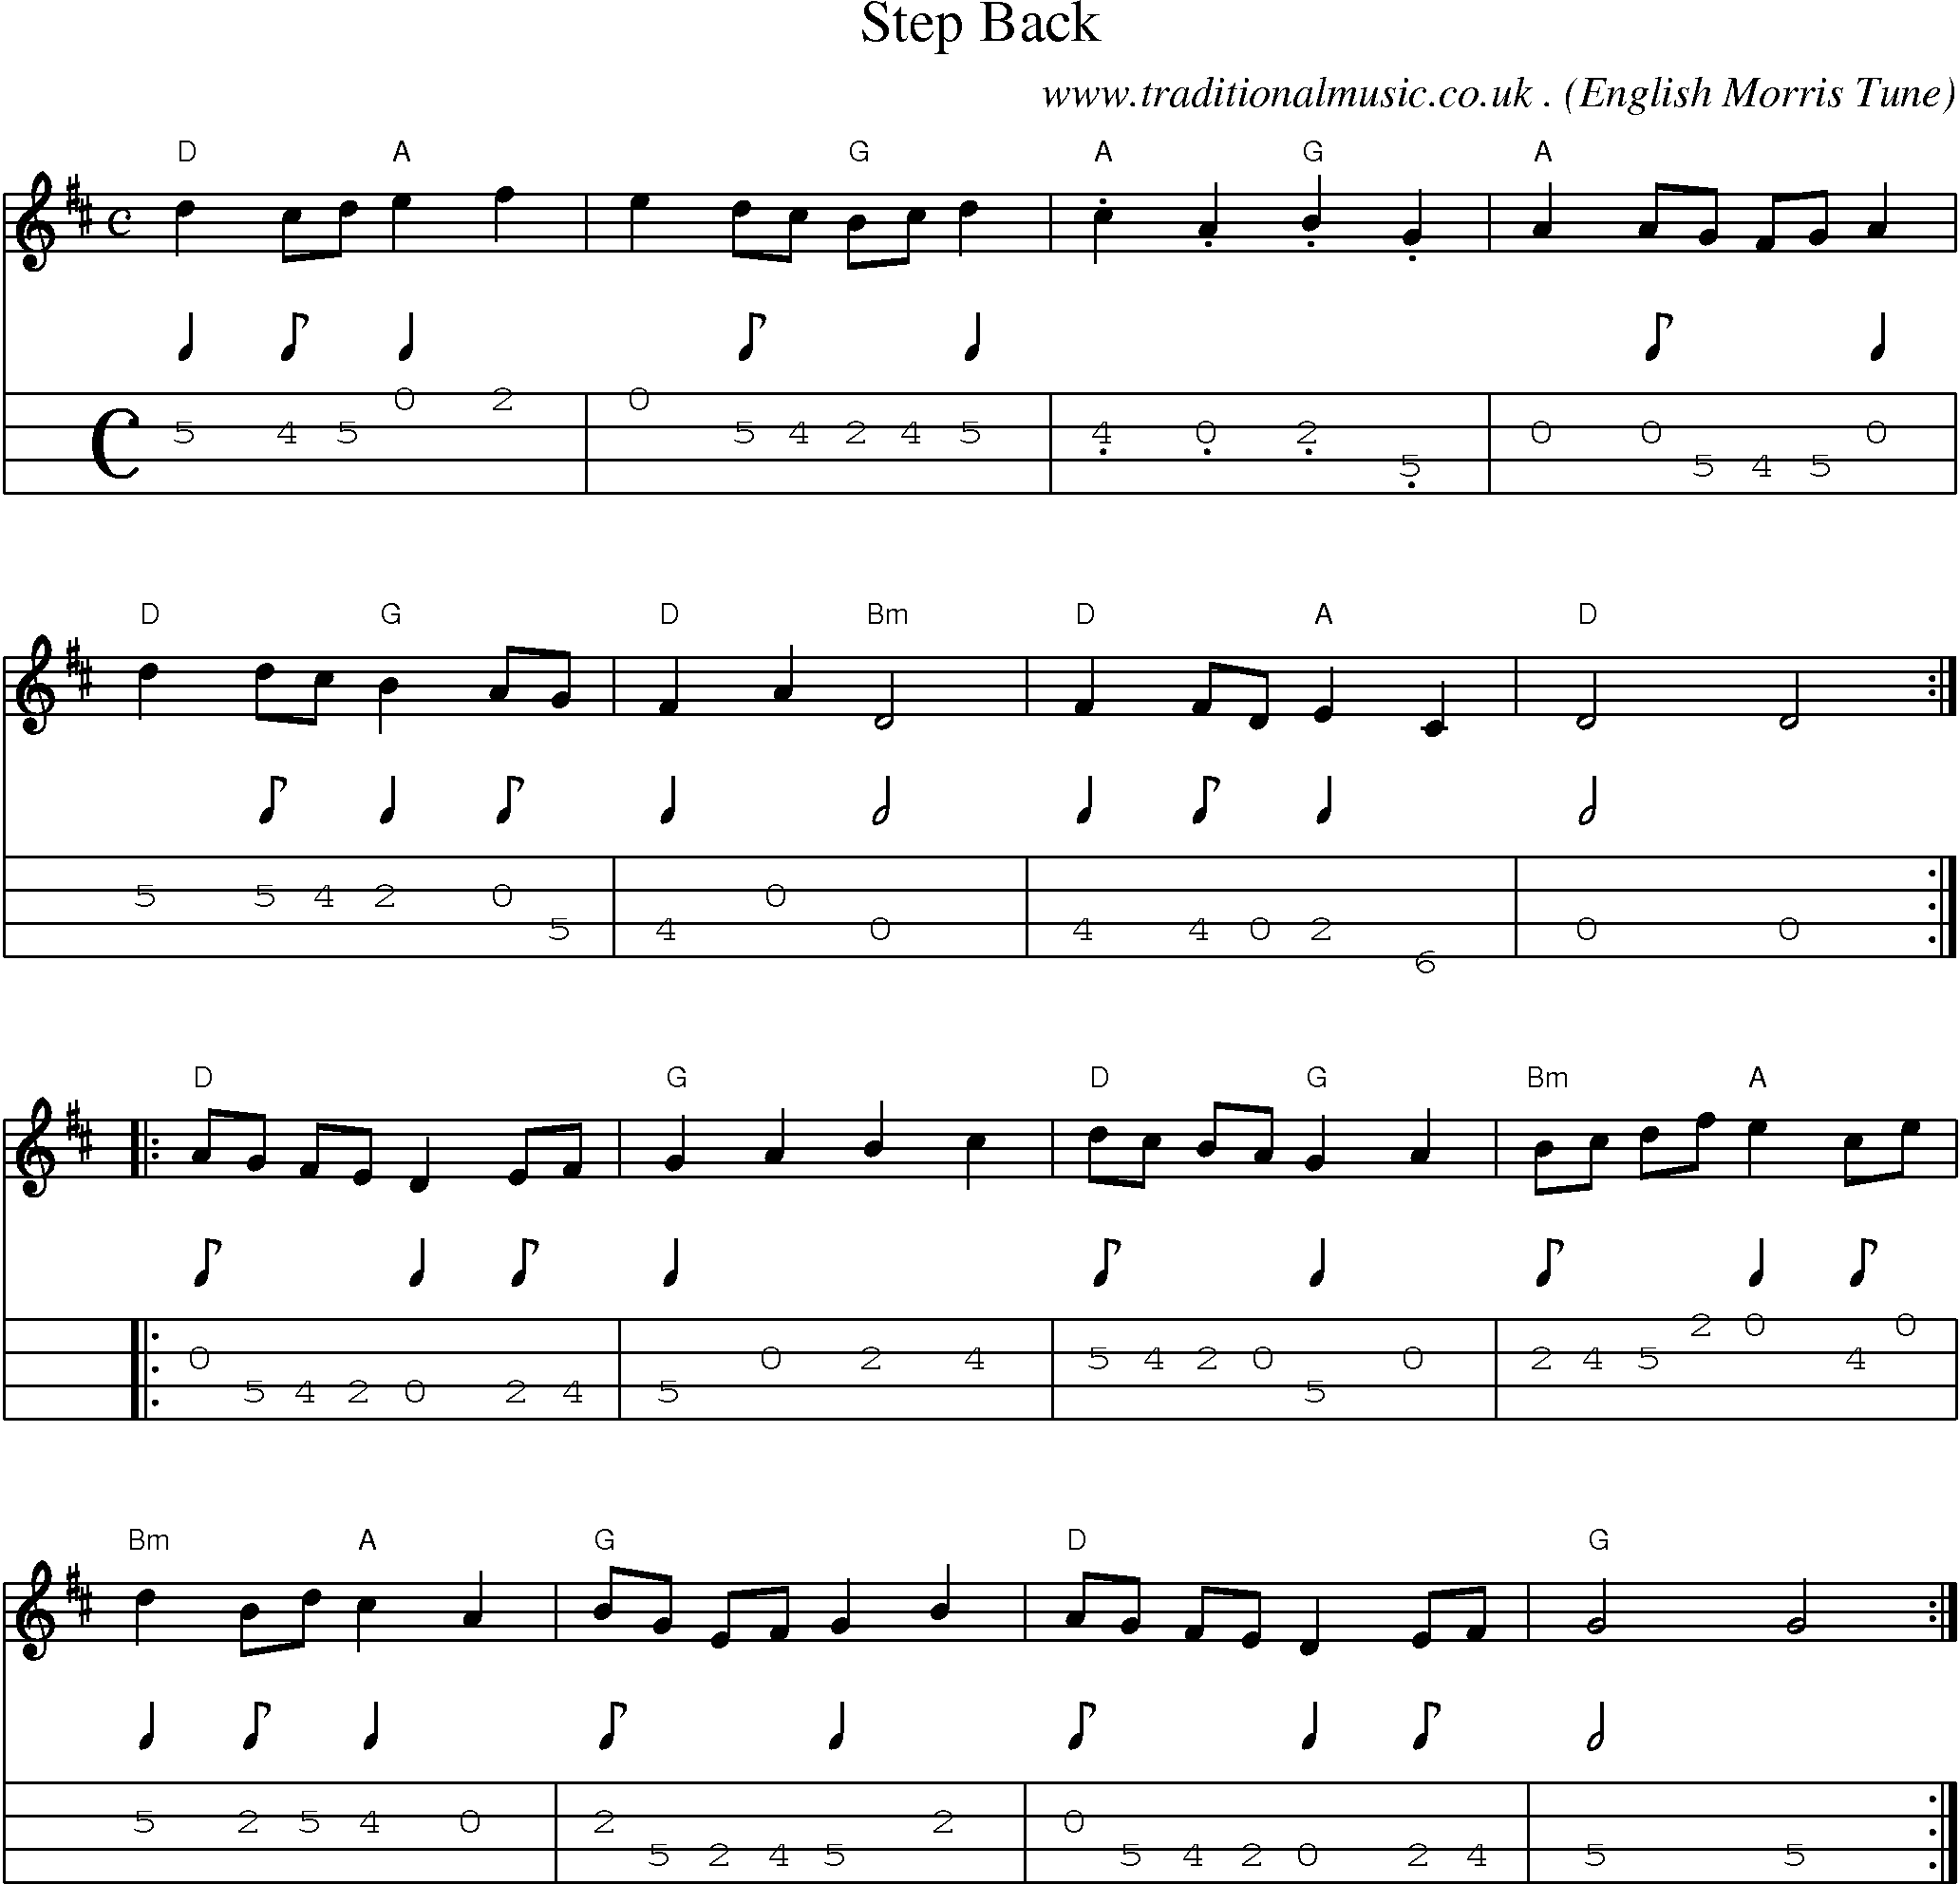 Music Score and Guitar Tabs for Step Back